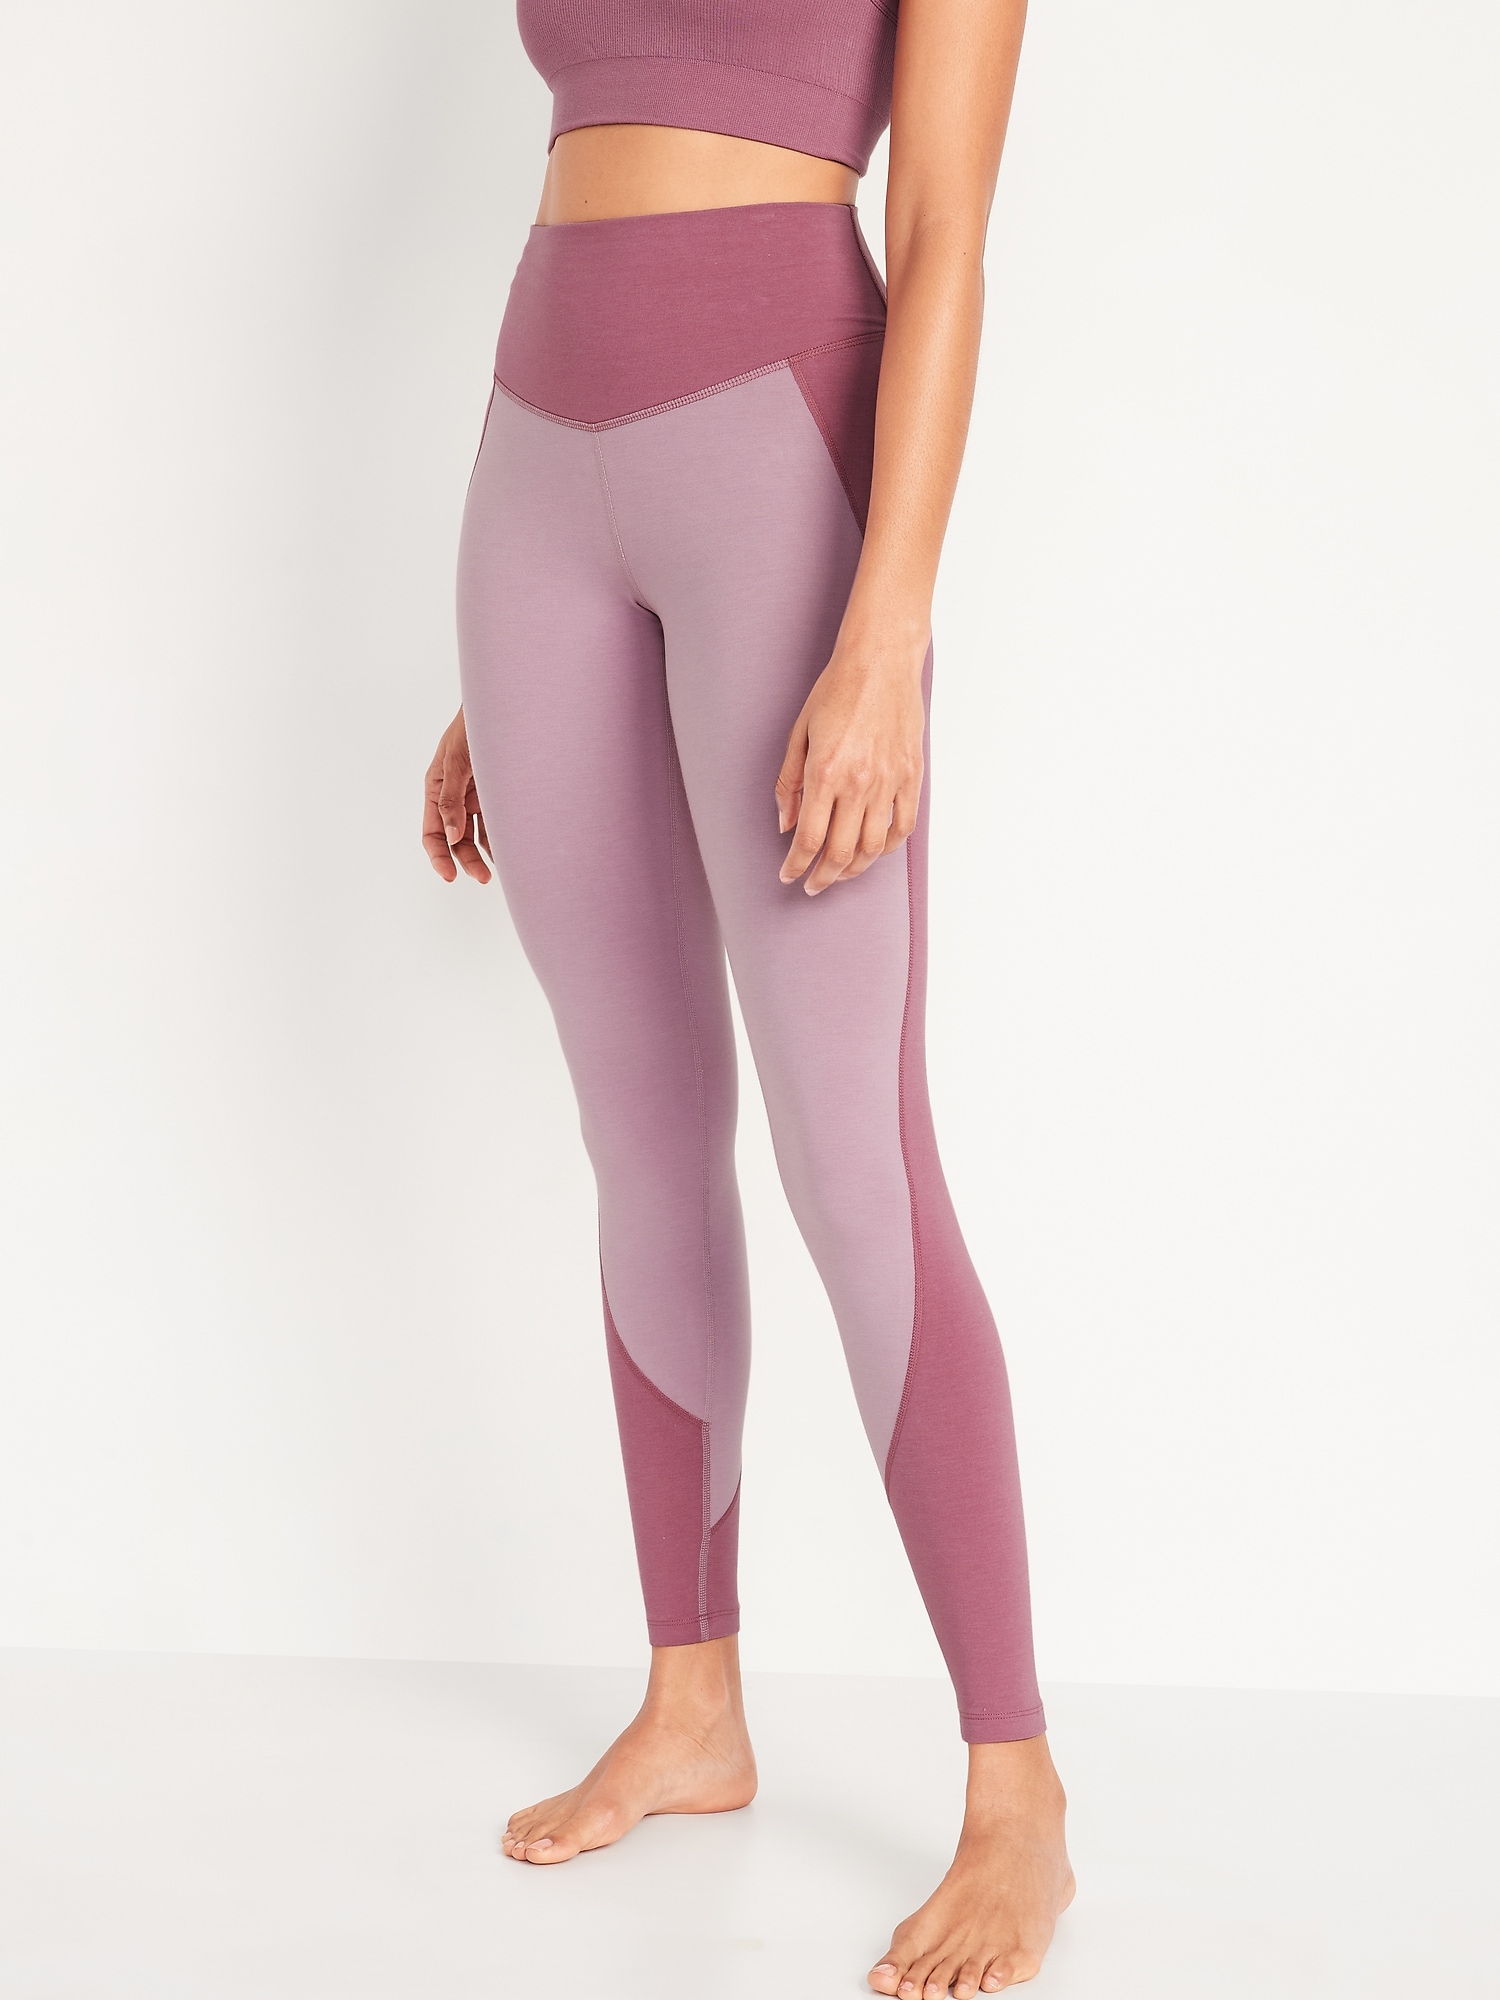 Extra High-Waisted PowerChill Two-Tone Compression Leggings for Women